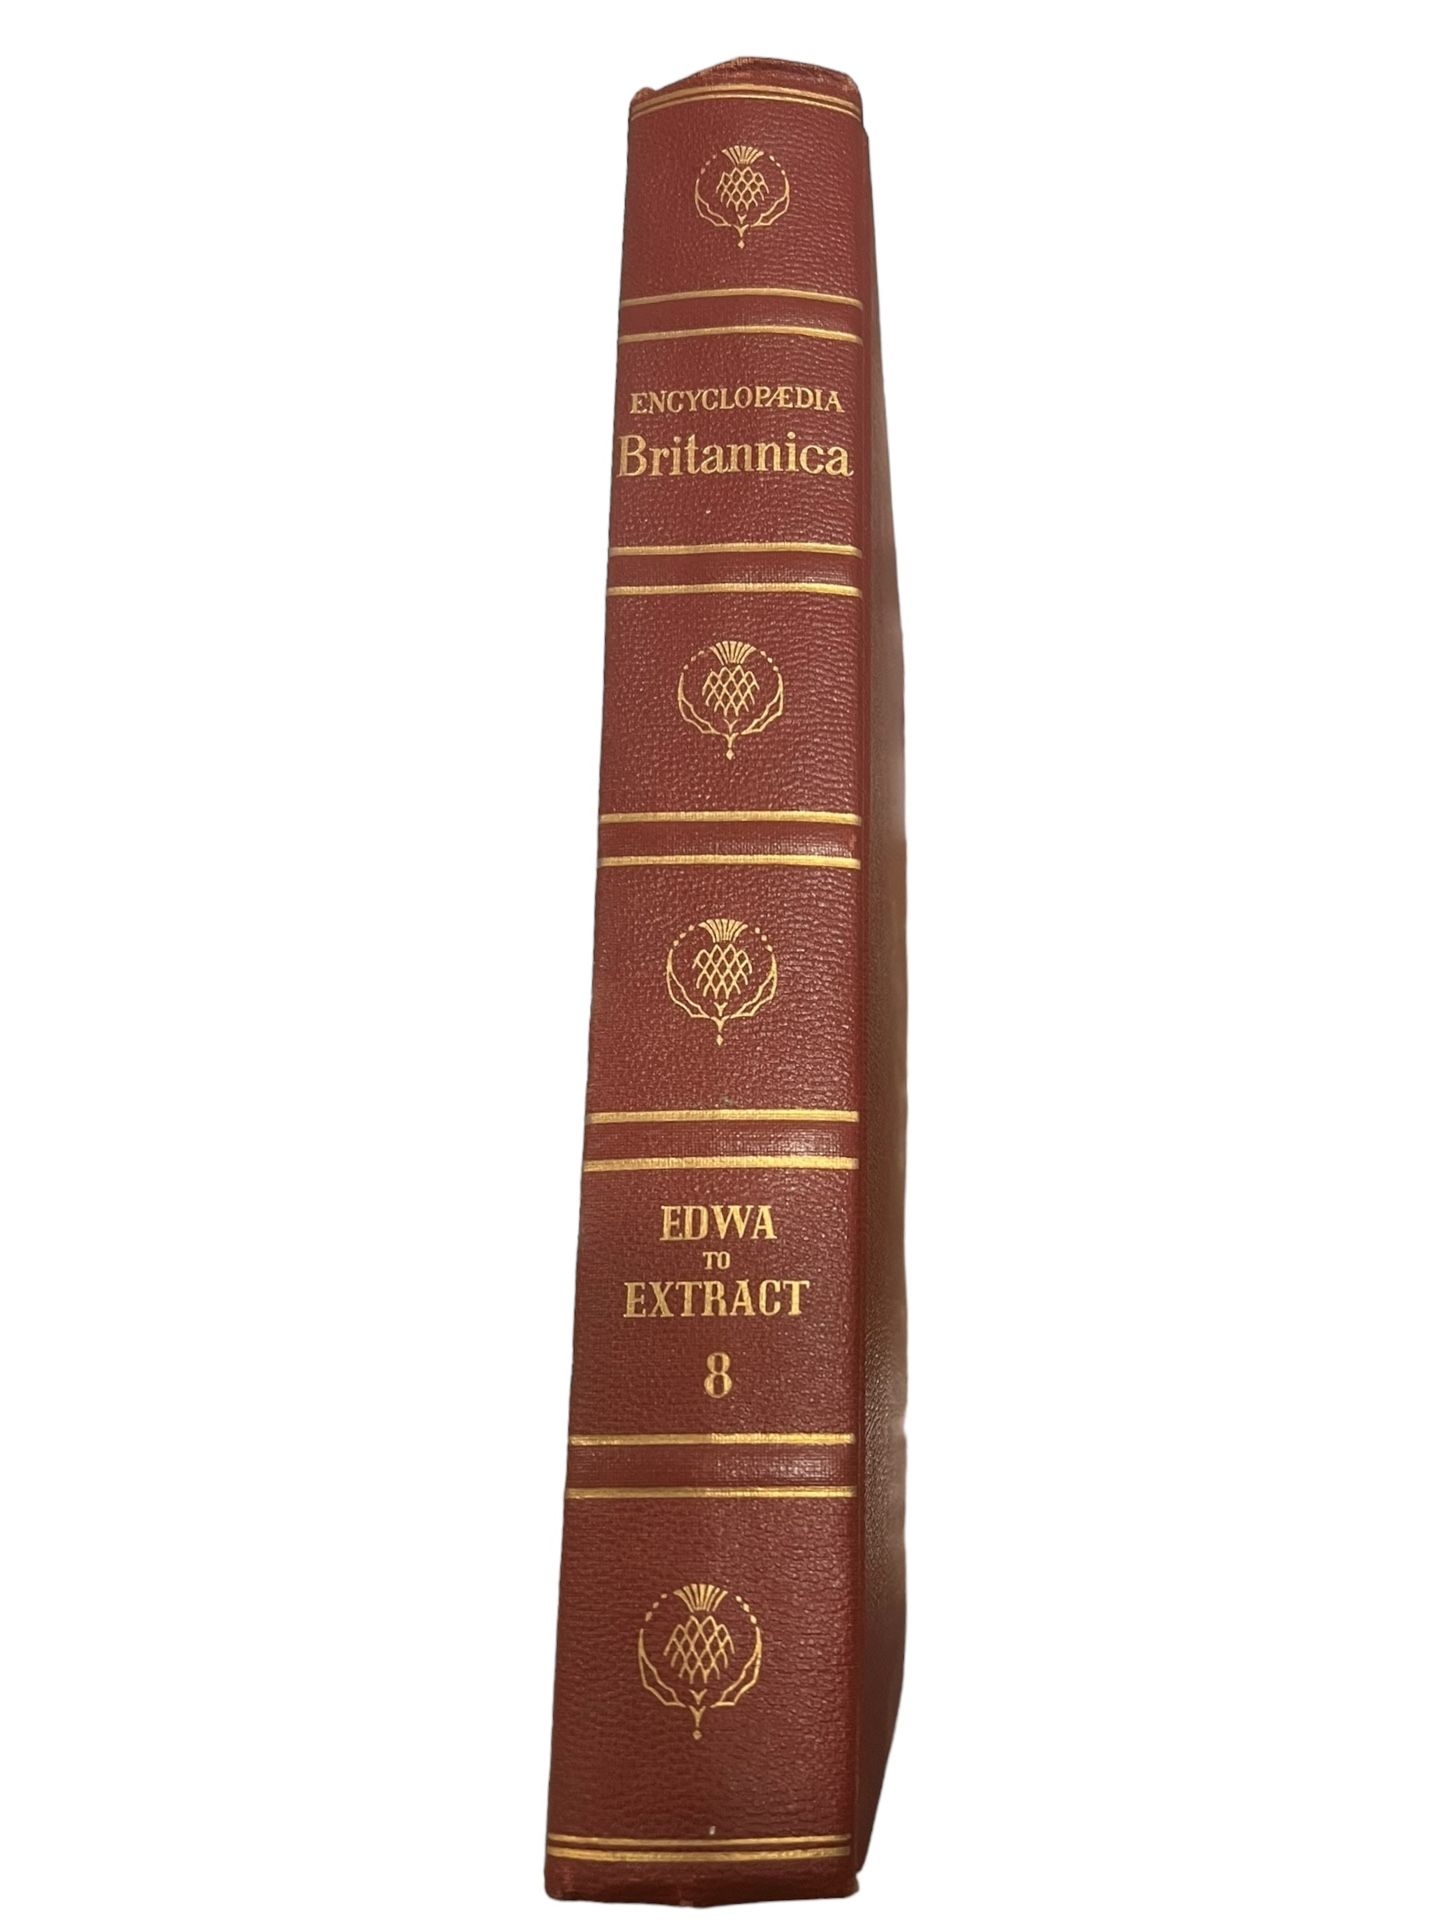 Encyclopedia Britannica 1768 Volume 8 From 1960 Edwa To Extract William Benton This is a hardcover copy of the Encyclopedia Britannica 1768 Volume 8, 